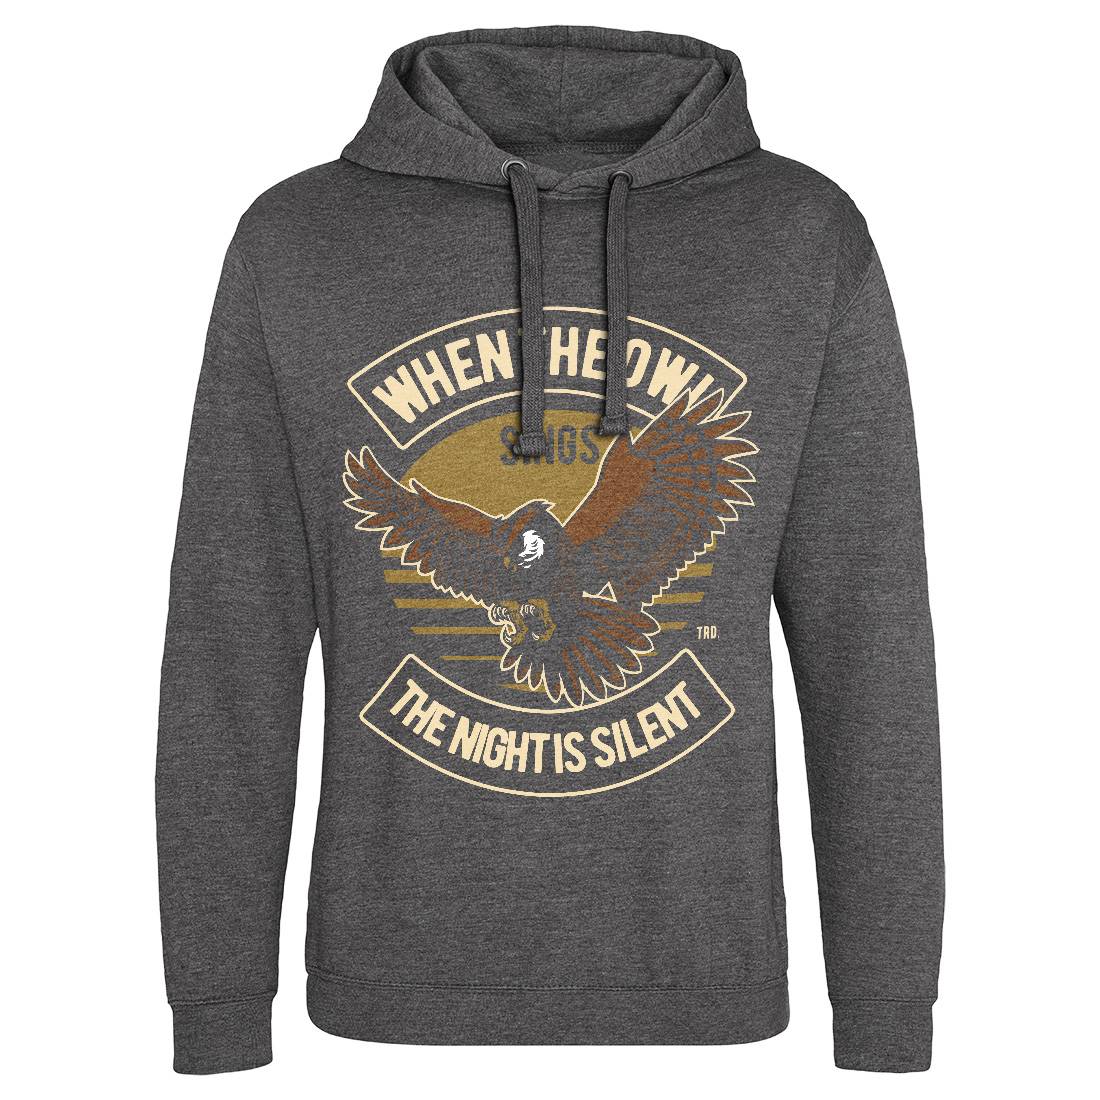 Owl Sings Mens Hoodie Without Pocket Animals D561